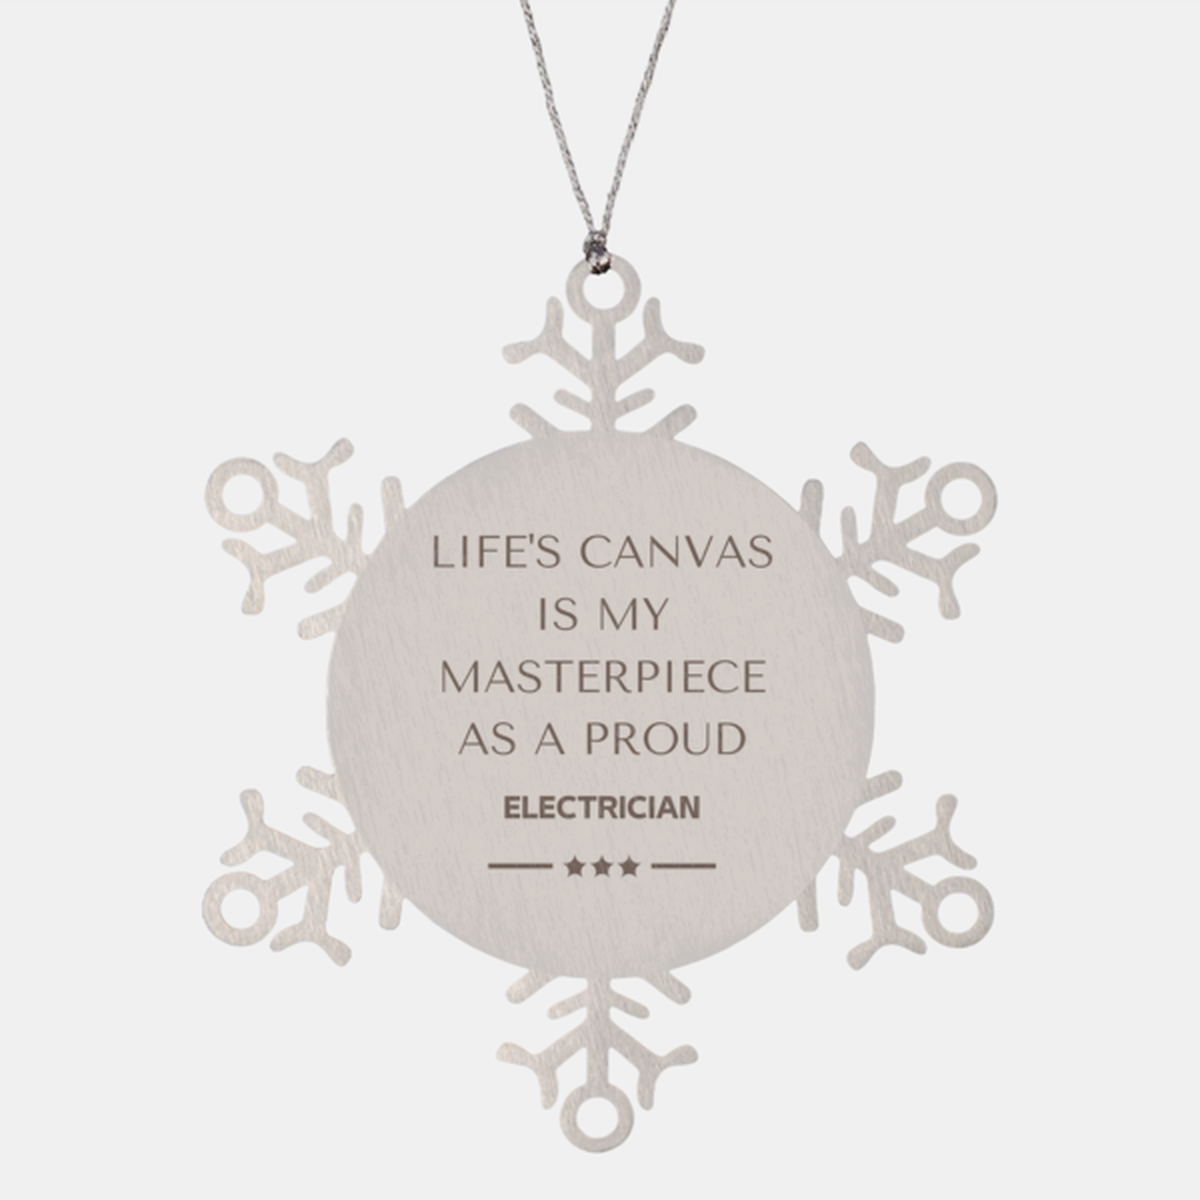 Proud Electrician Gifts, Life's canvas is my masterpiece, Epic Birthday Christmas Unique Snowflake Ornament For Electrician, Coworkers, Men, Women, Friends